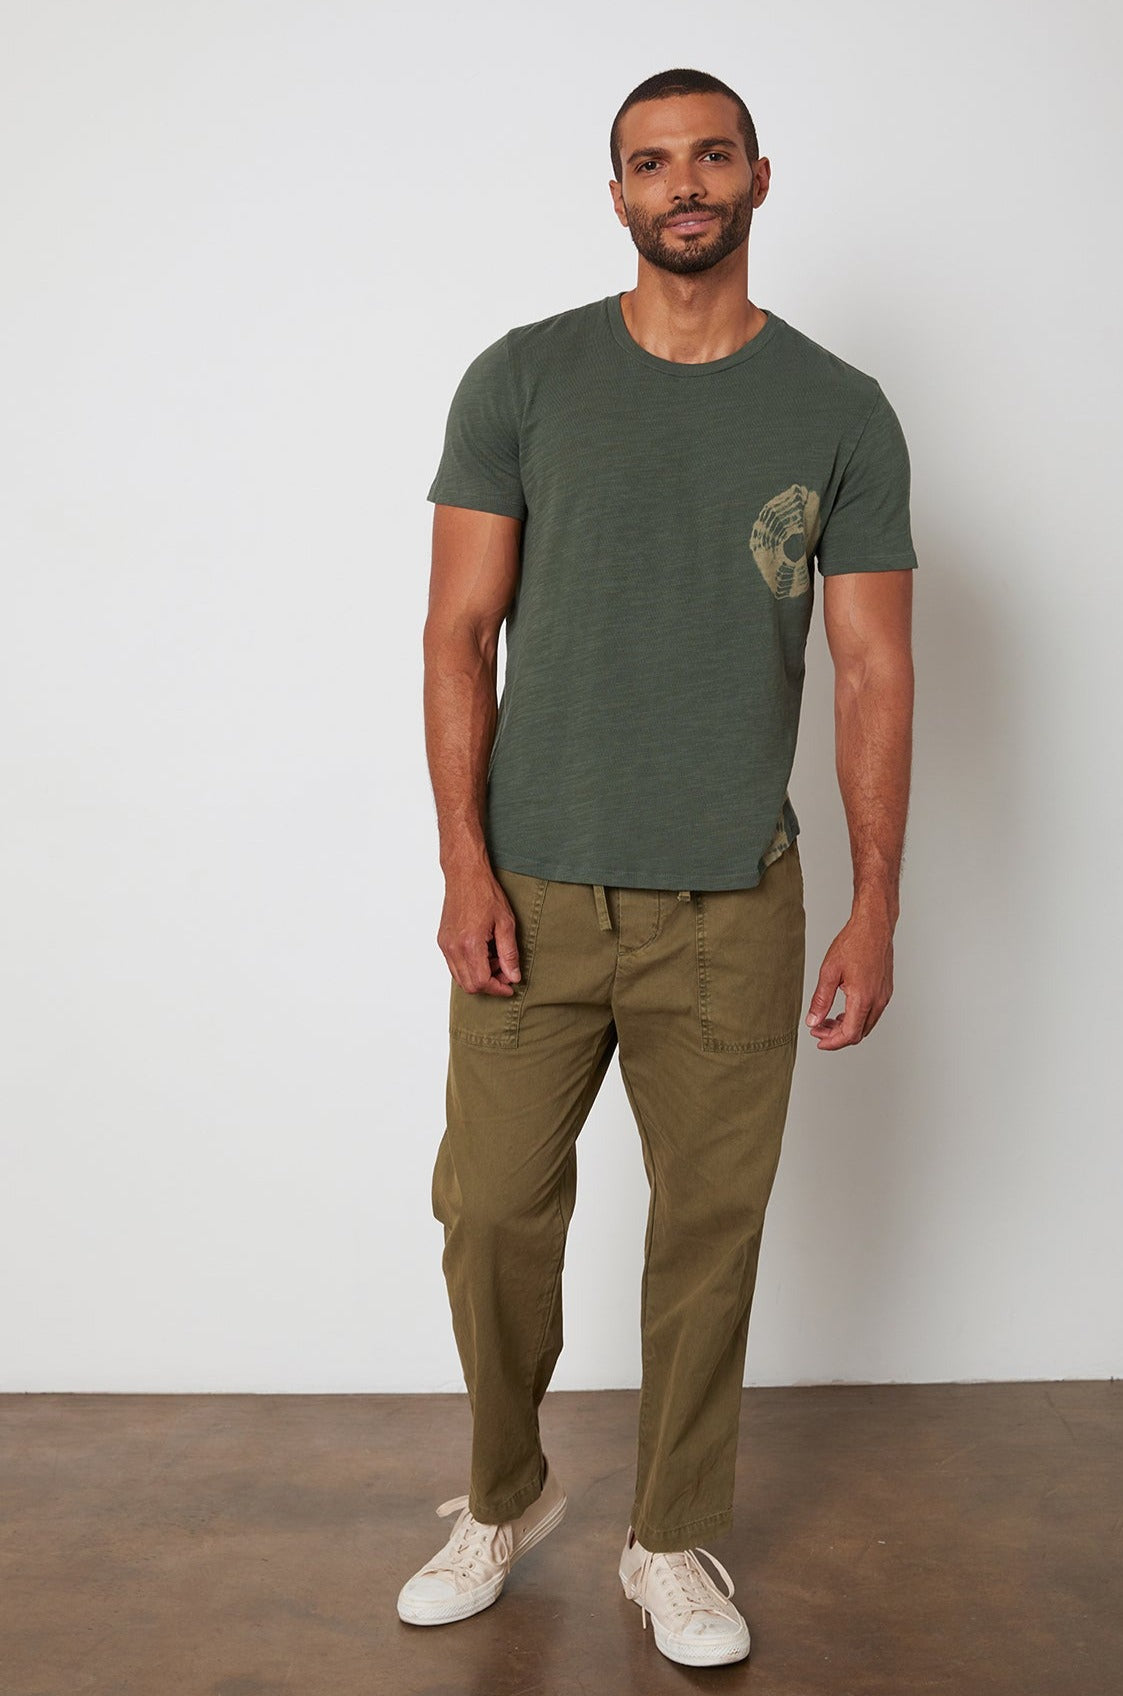 Asher tee olive front-24256766312641